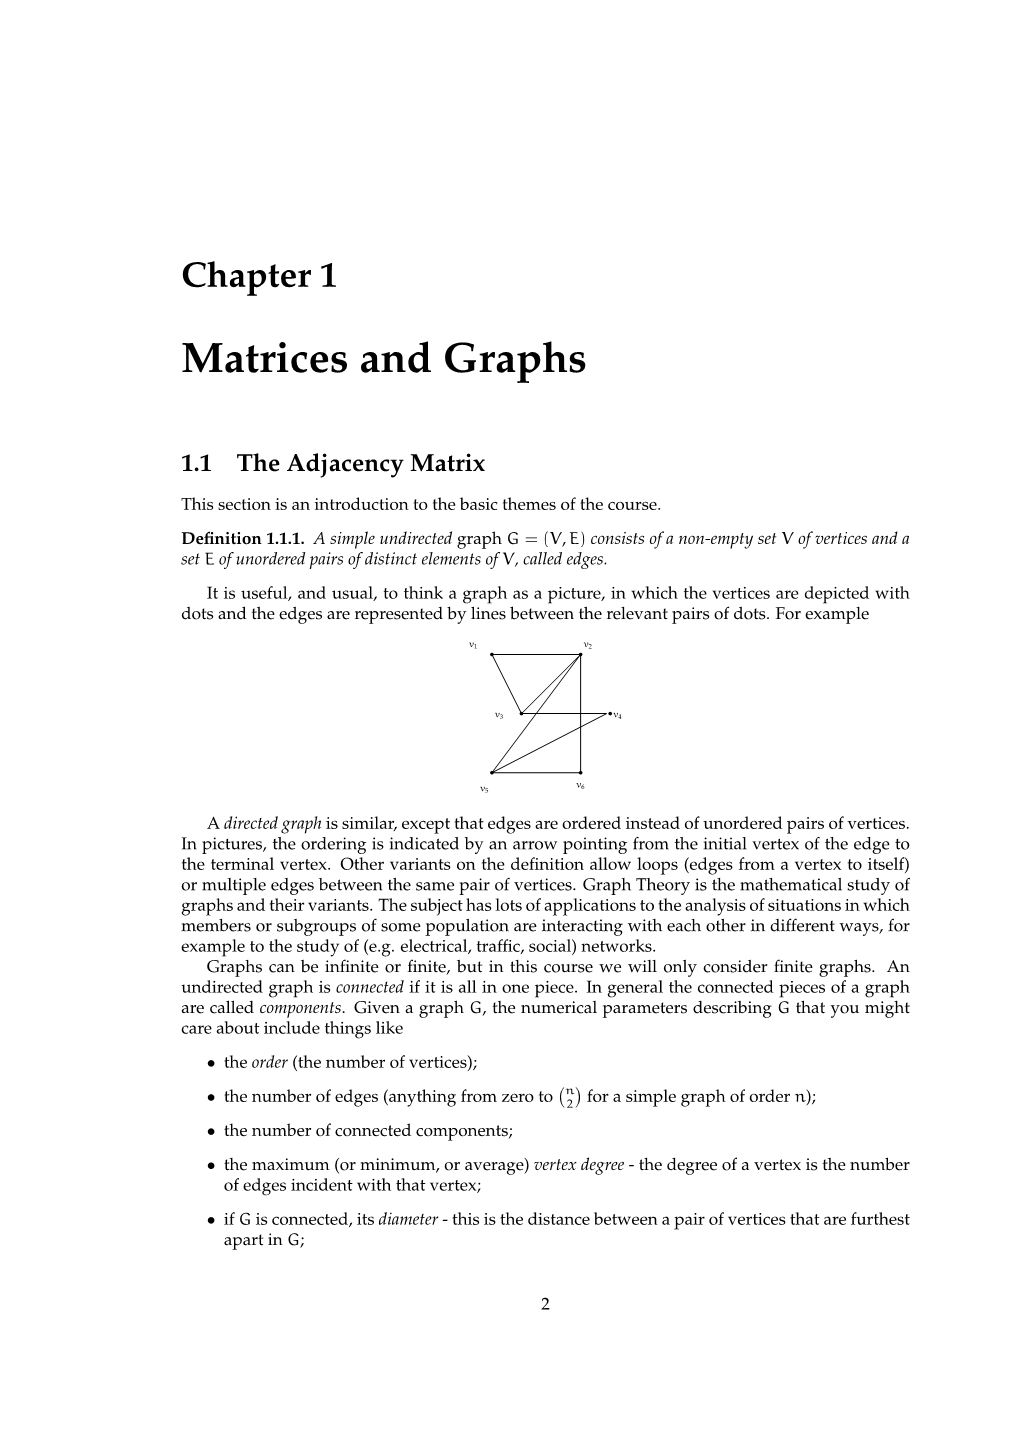 Matrices and Graphs